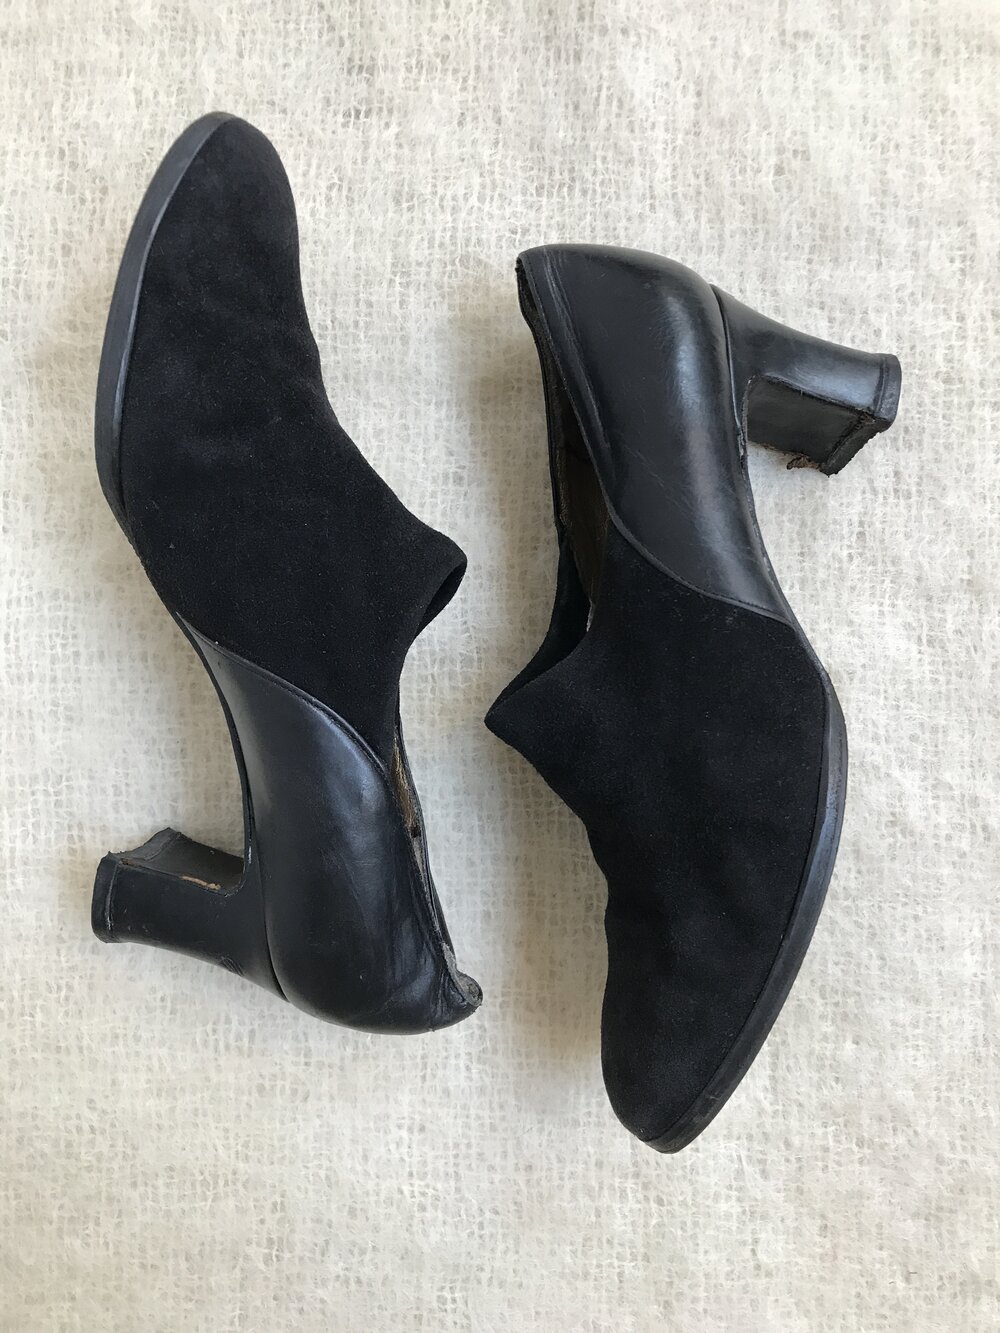 patroon Hechting Niet modieus vintage Stuart Weitzman for Russell and Bromley black suede and leather  shoes / 90s chunky heel shoes / 1990s minimalist shoes — Dusty Rose Vintage